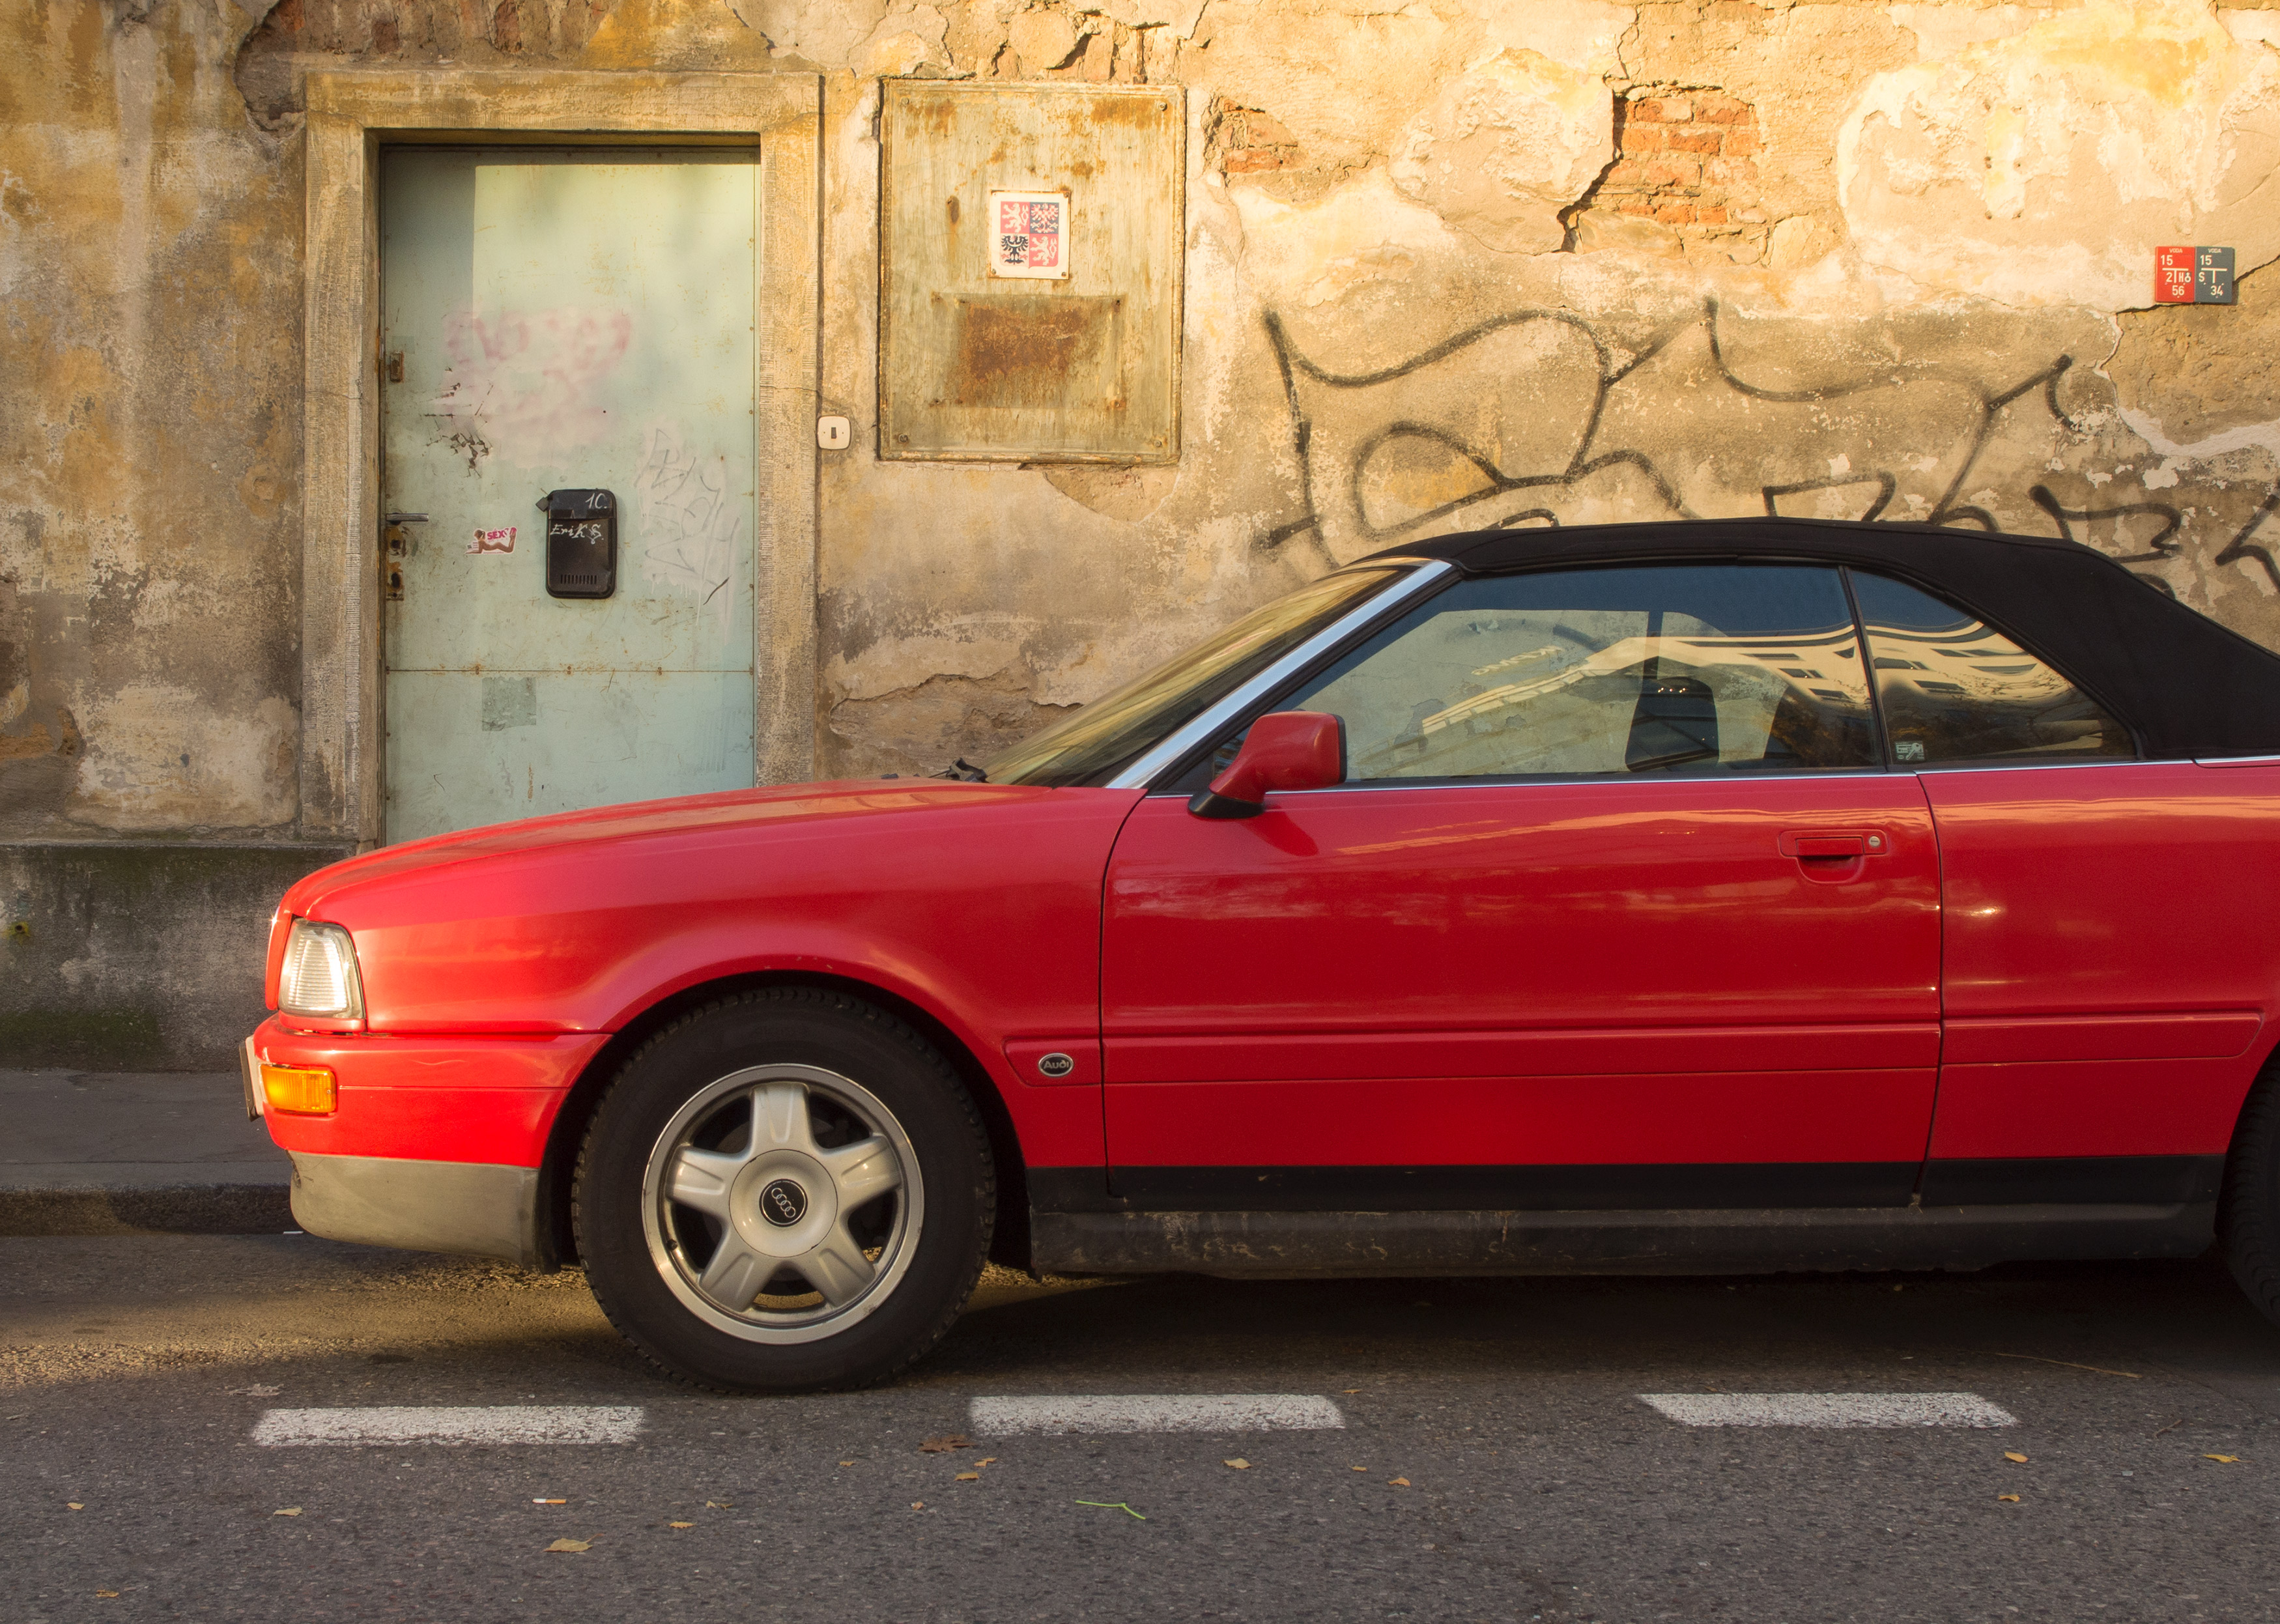 Red Car Cabrio With Grunge Wall | Free Stock Photo | LibreShot